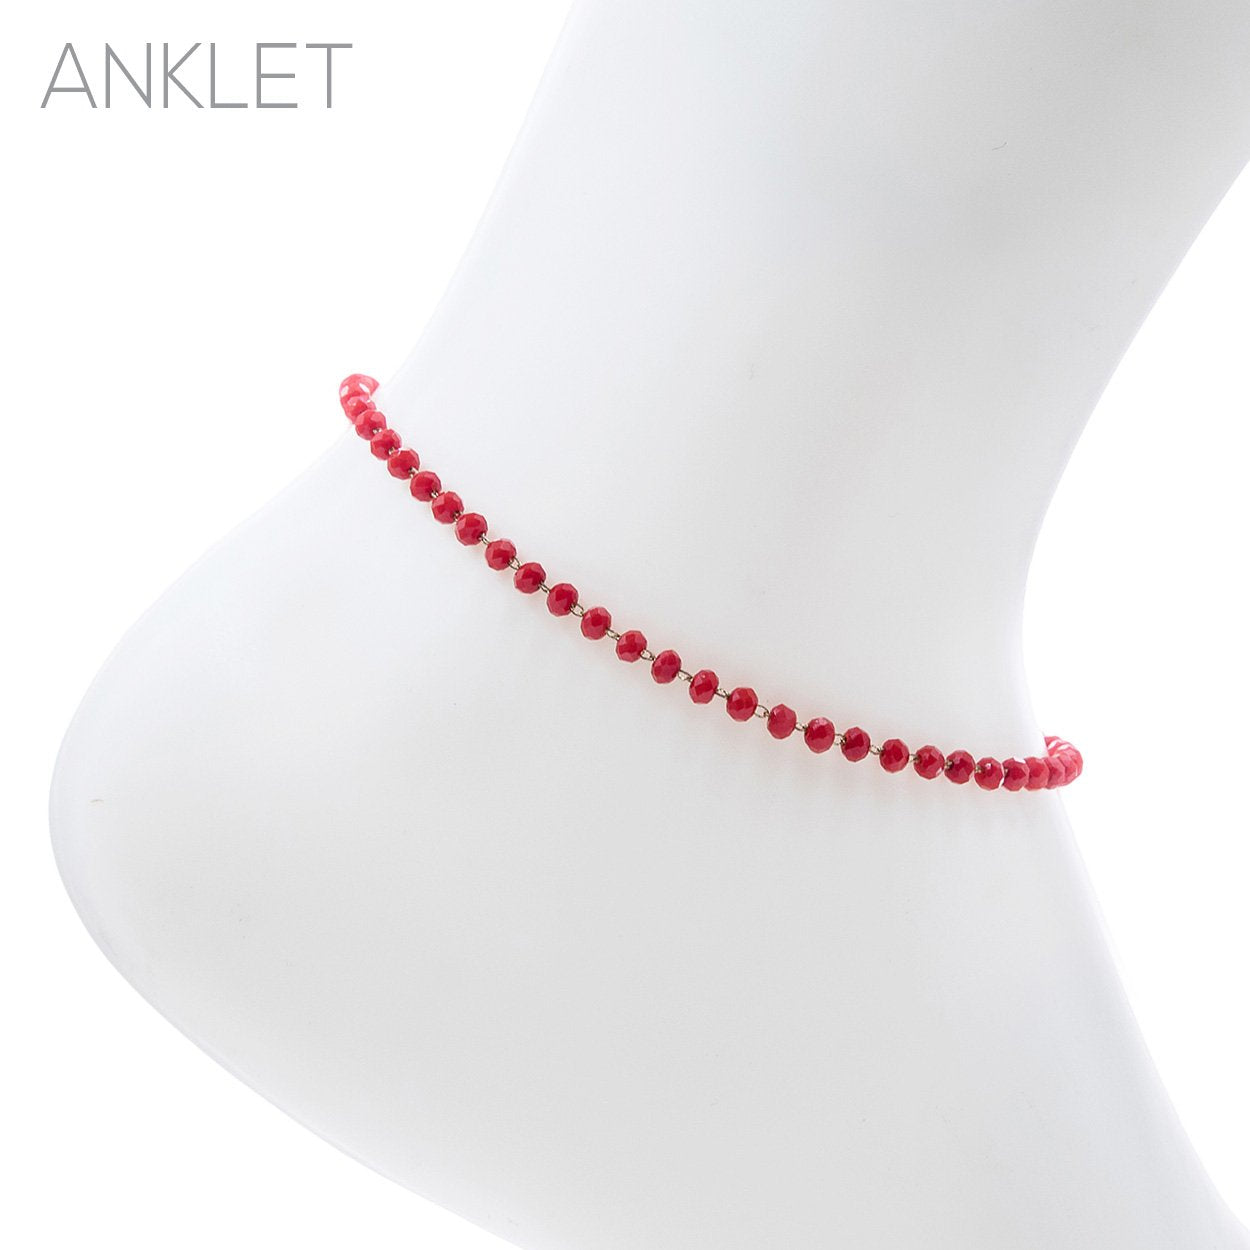 3mm Glass Crystal Bead Chain Ankle Bracelet Anklet, 9"-11" with 2" Extender (Poppy Red)